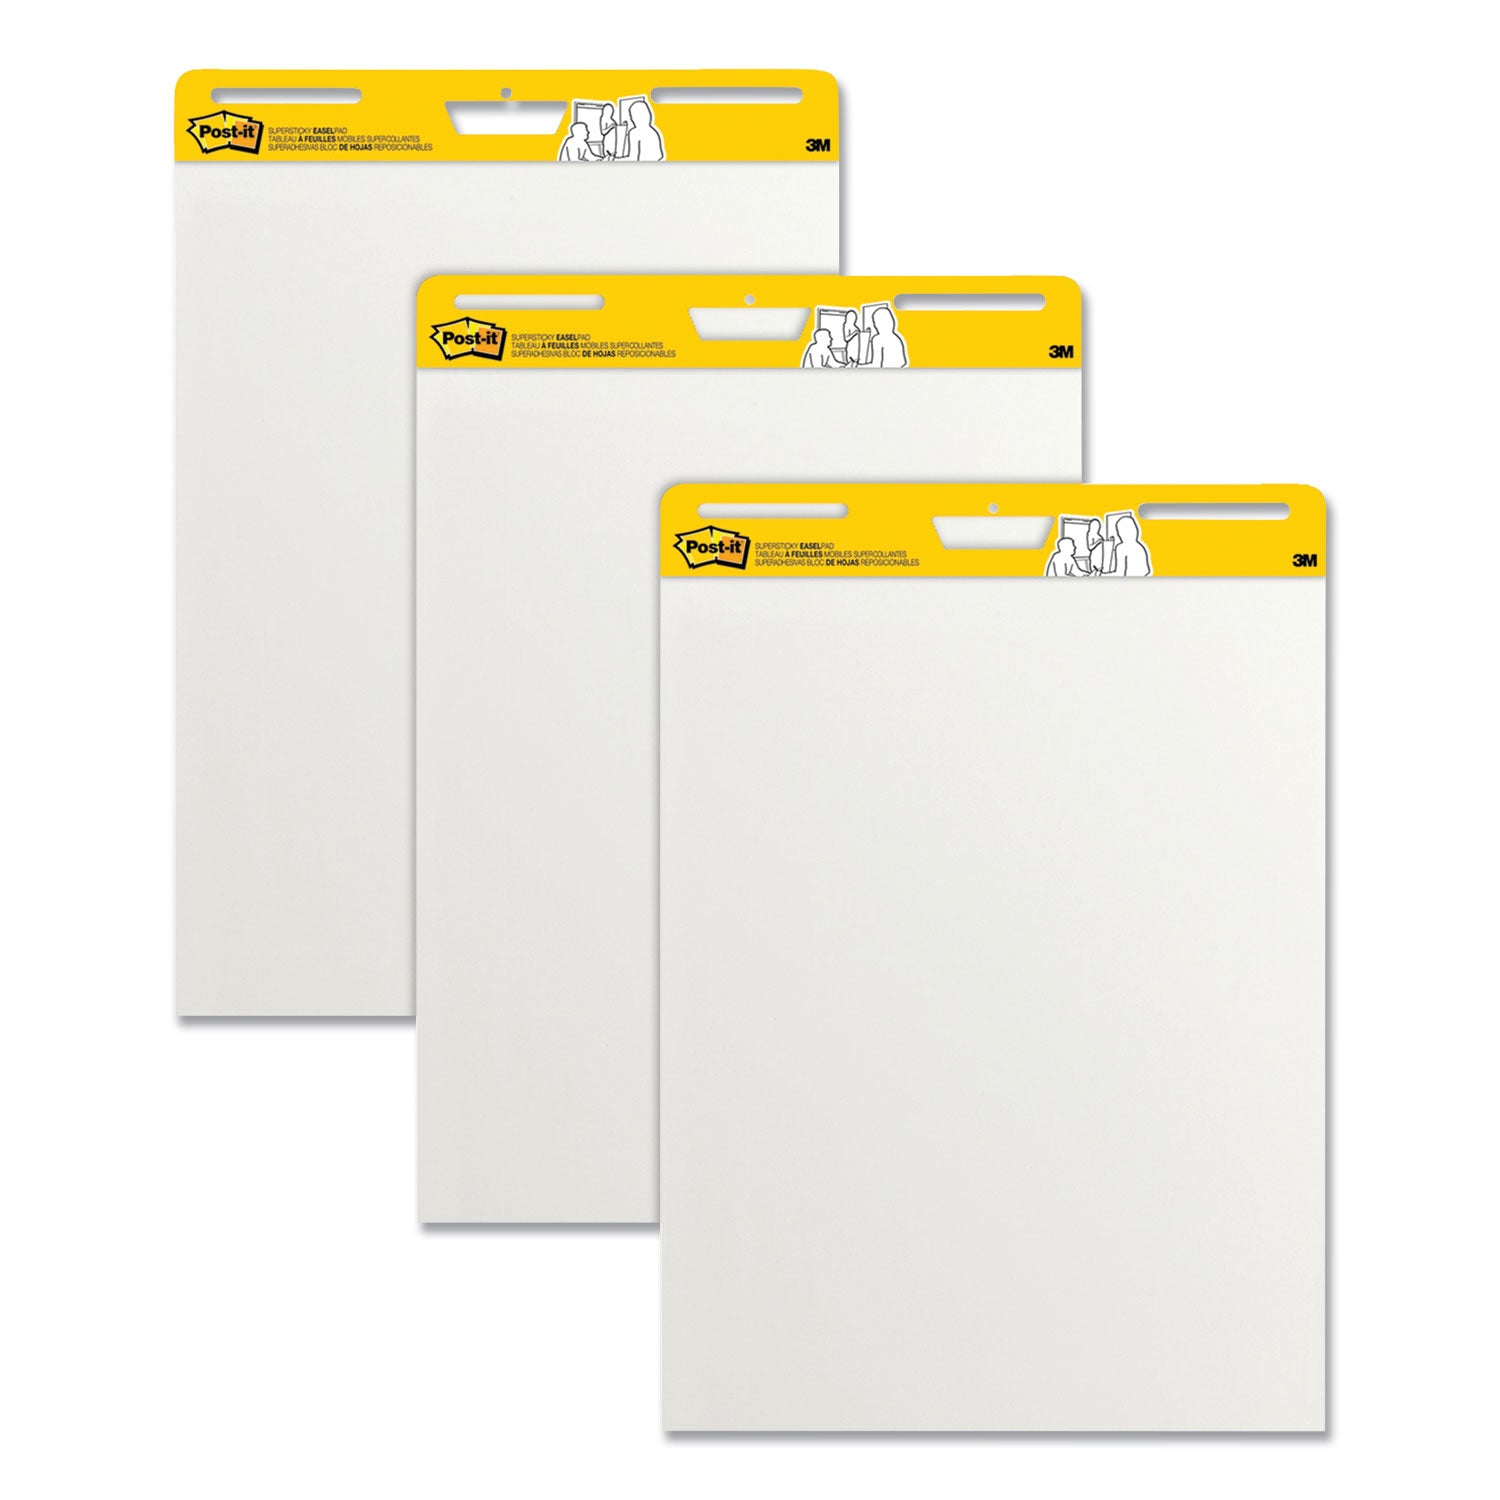 vertical-orientation-self-stick-easel-pads-unruled-25-x-30-white-30-sheets-3-pack_mmm559vad203pk - 1